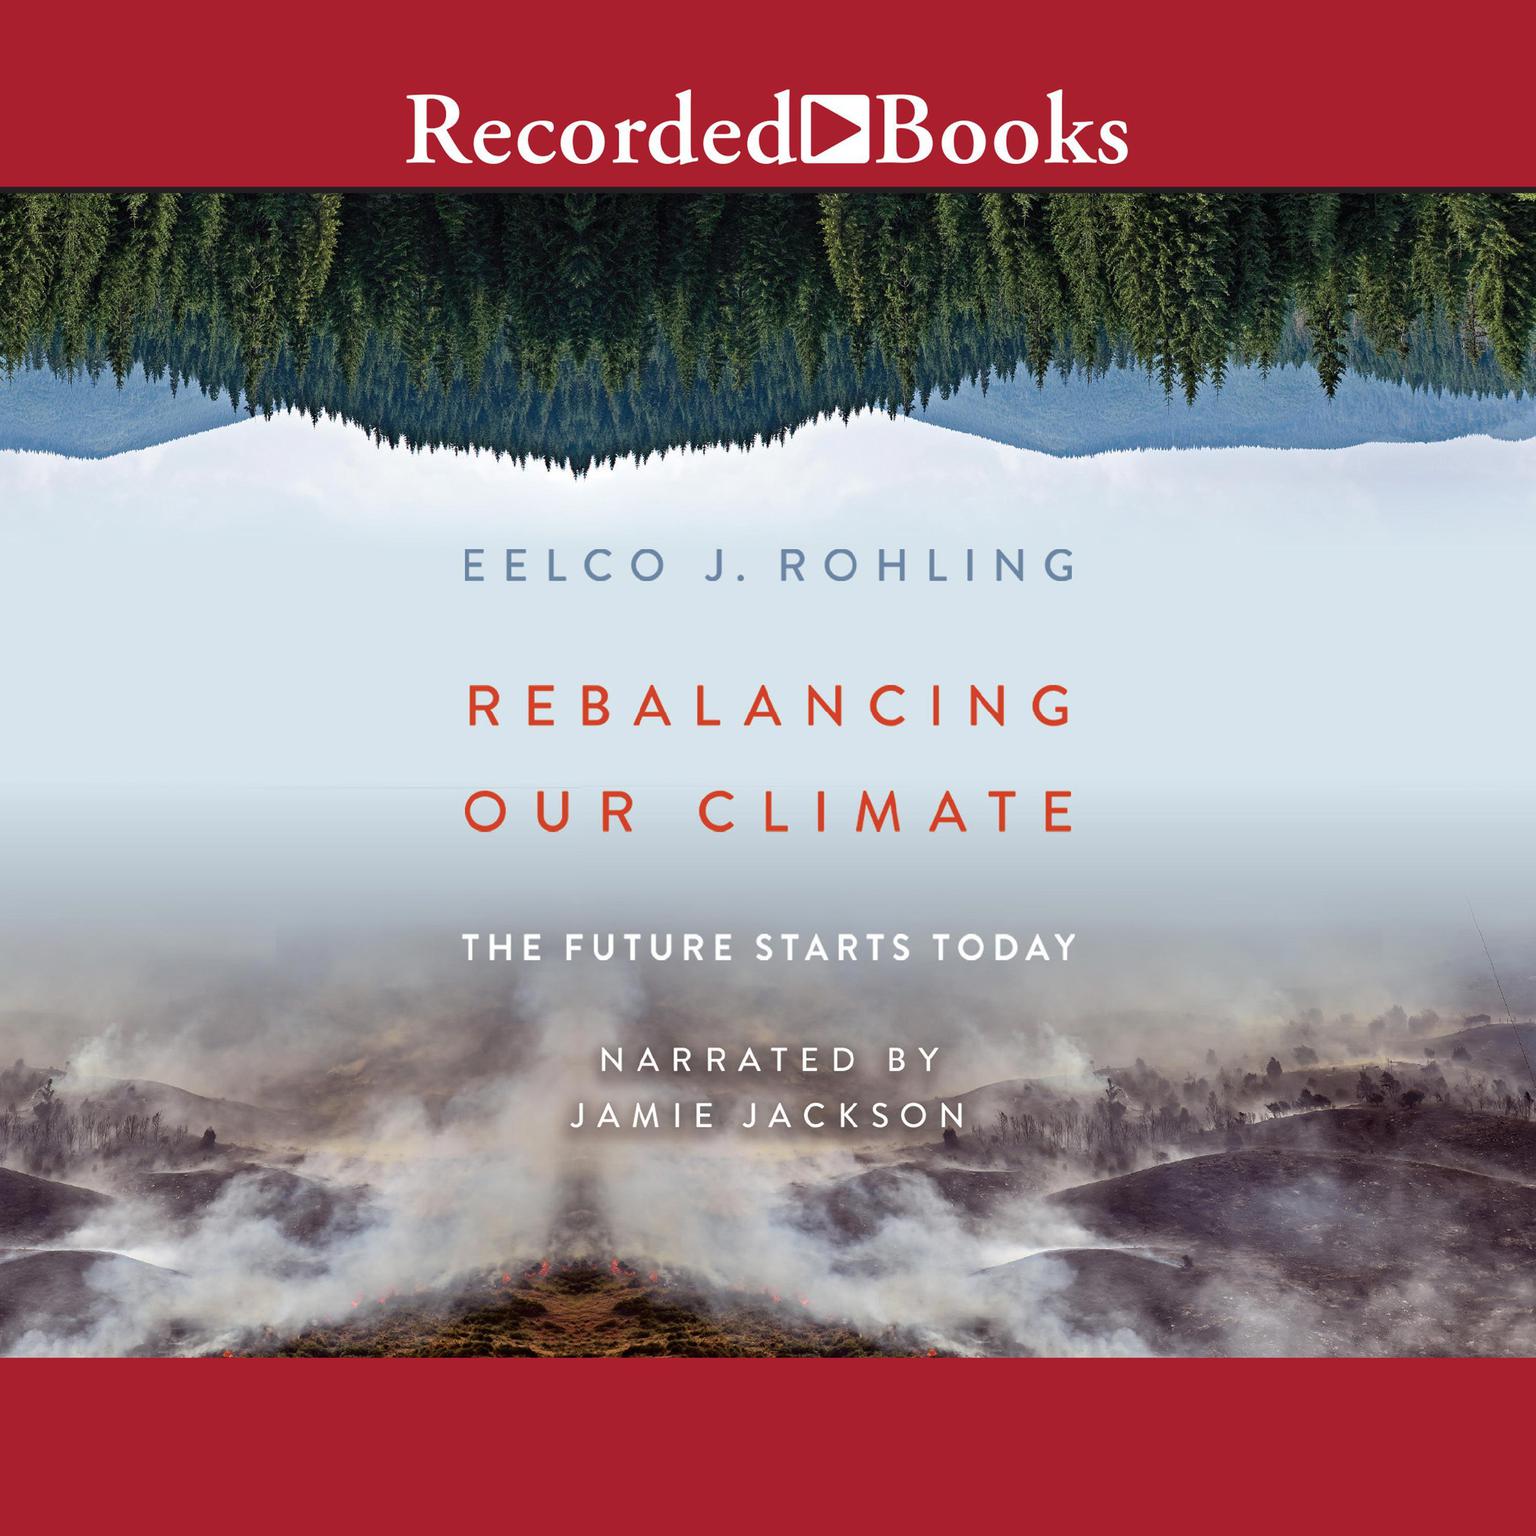 Rebalancing Our Climate: The Future Starts Today Audiobook, by Eelco J. Rohling